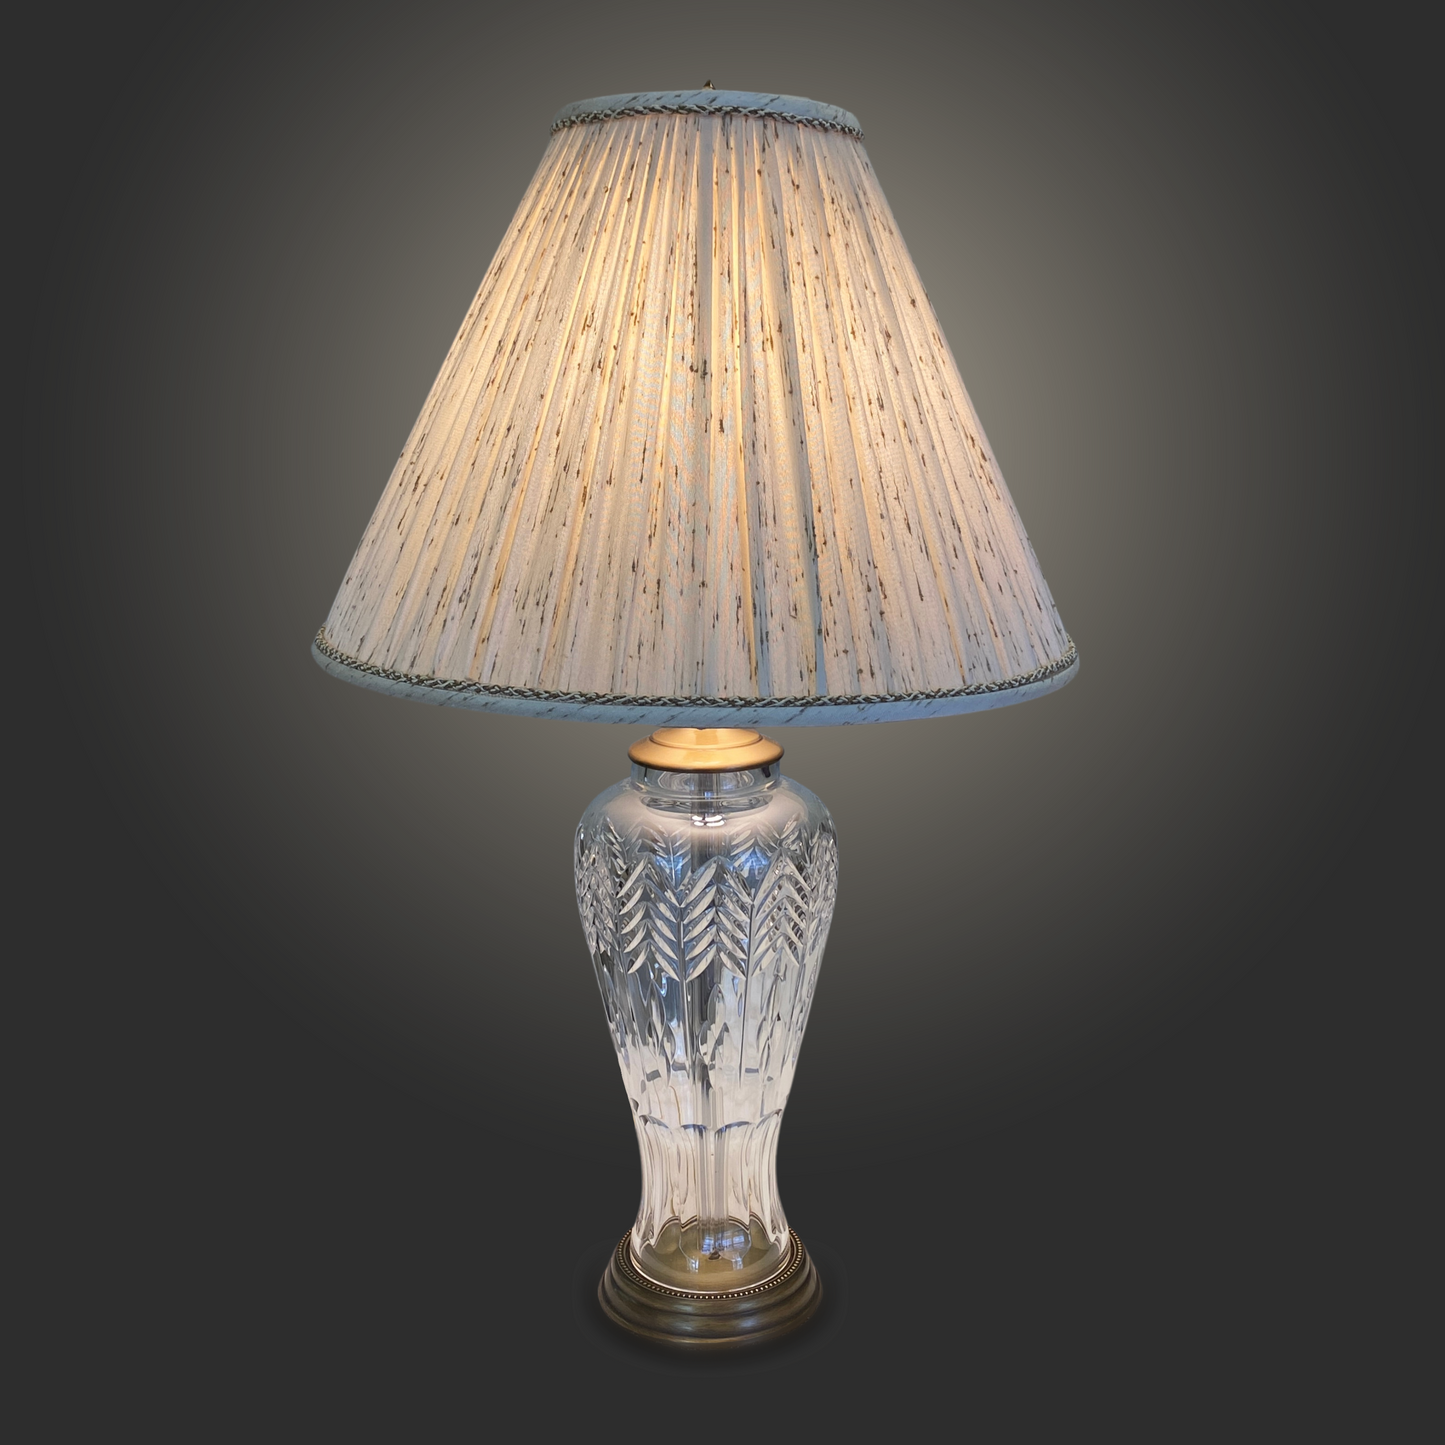 Waterford Crystal & Brushed Brass Lamp w/ Shade